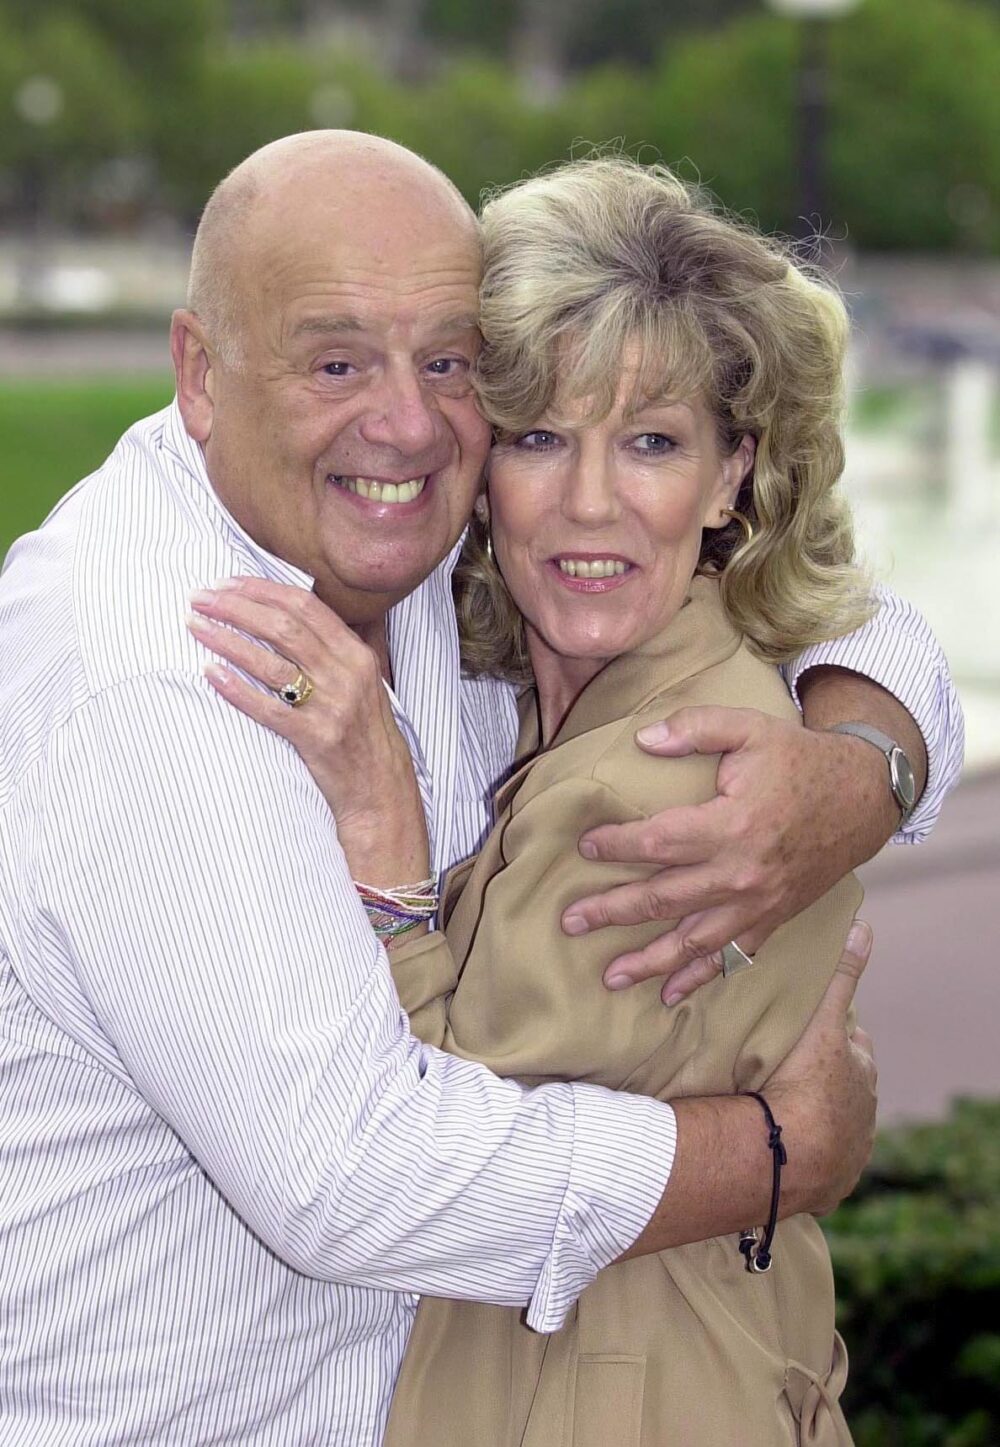 Coronation Street stars (L-R) Fred played by John Savident and Sue Nicholls as Audrey. Credit: PA